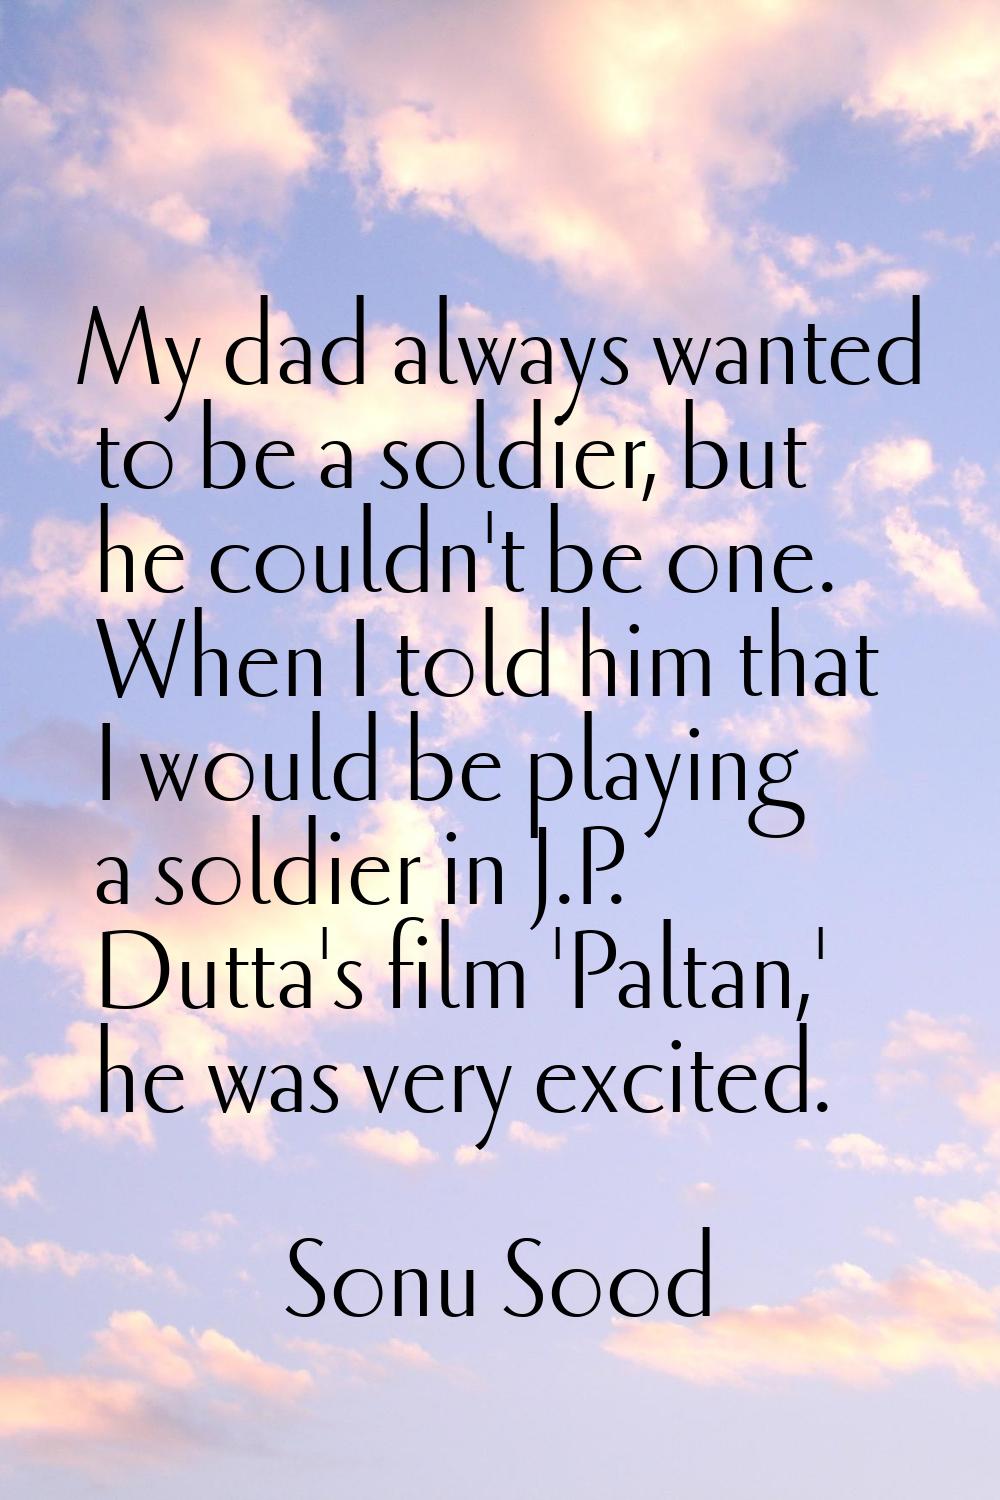 My dad always wanted to be a soldier, but he couldn't be one. When I told him that I would be playi